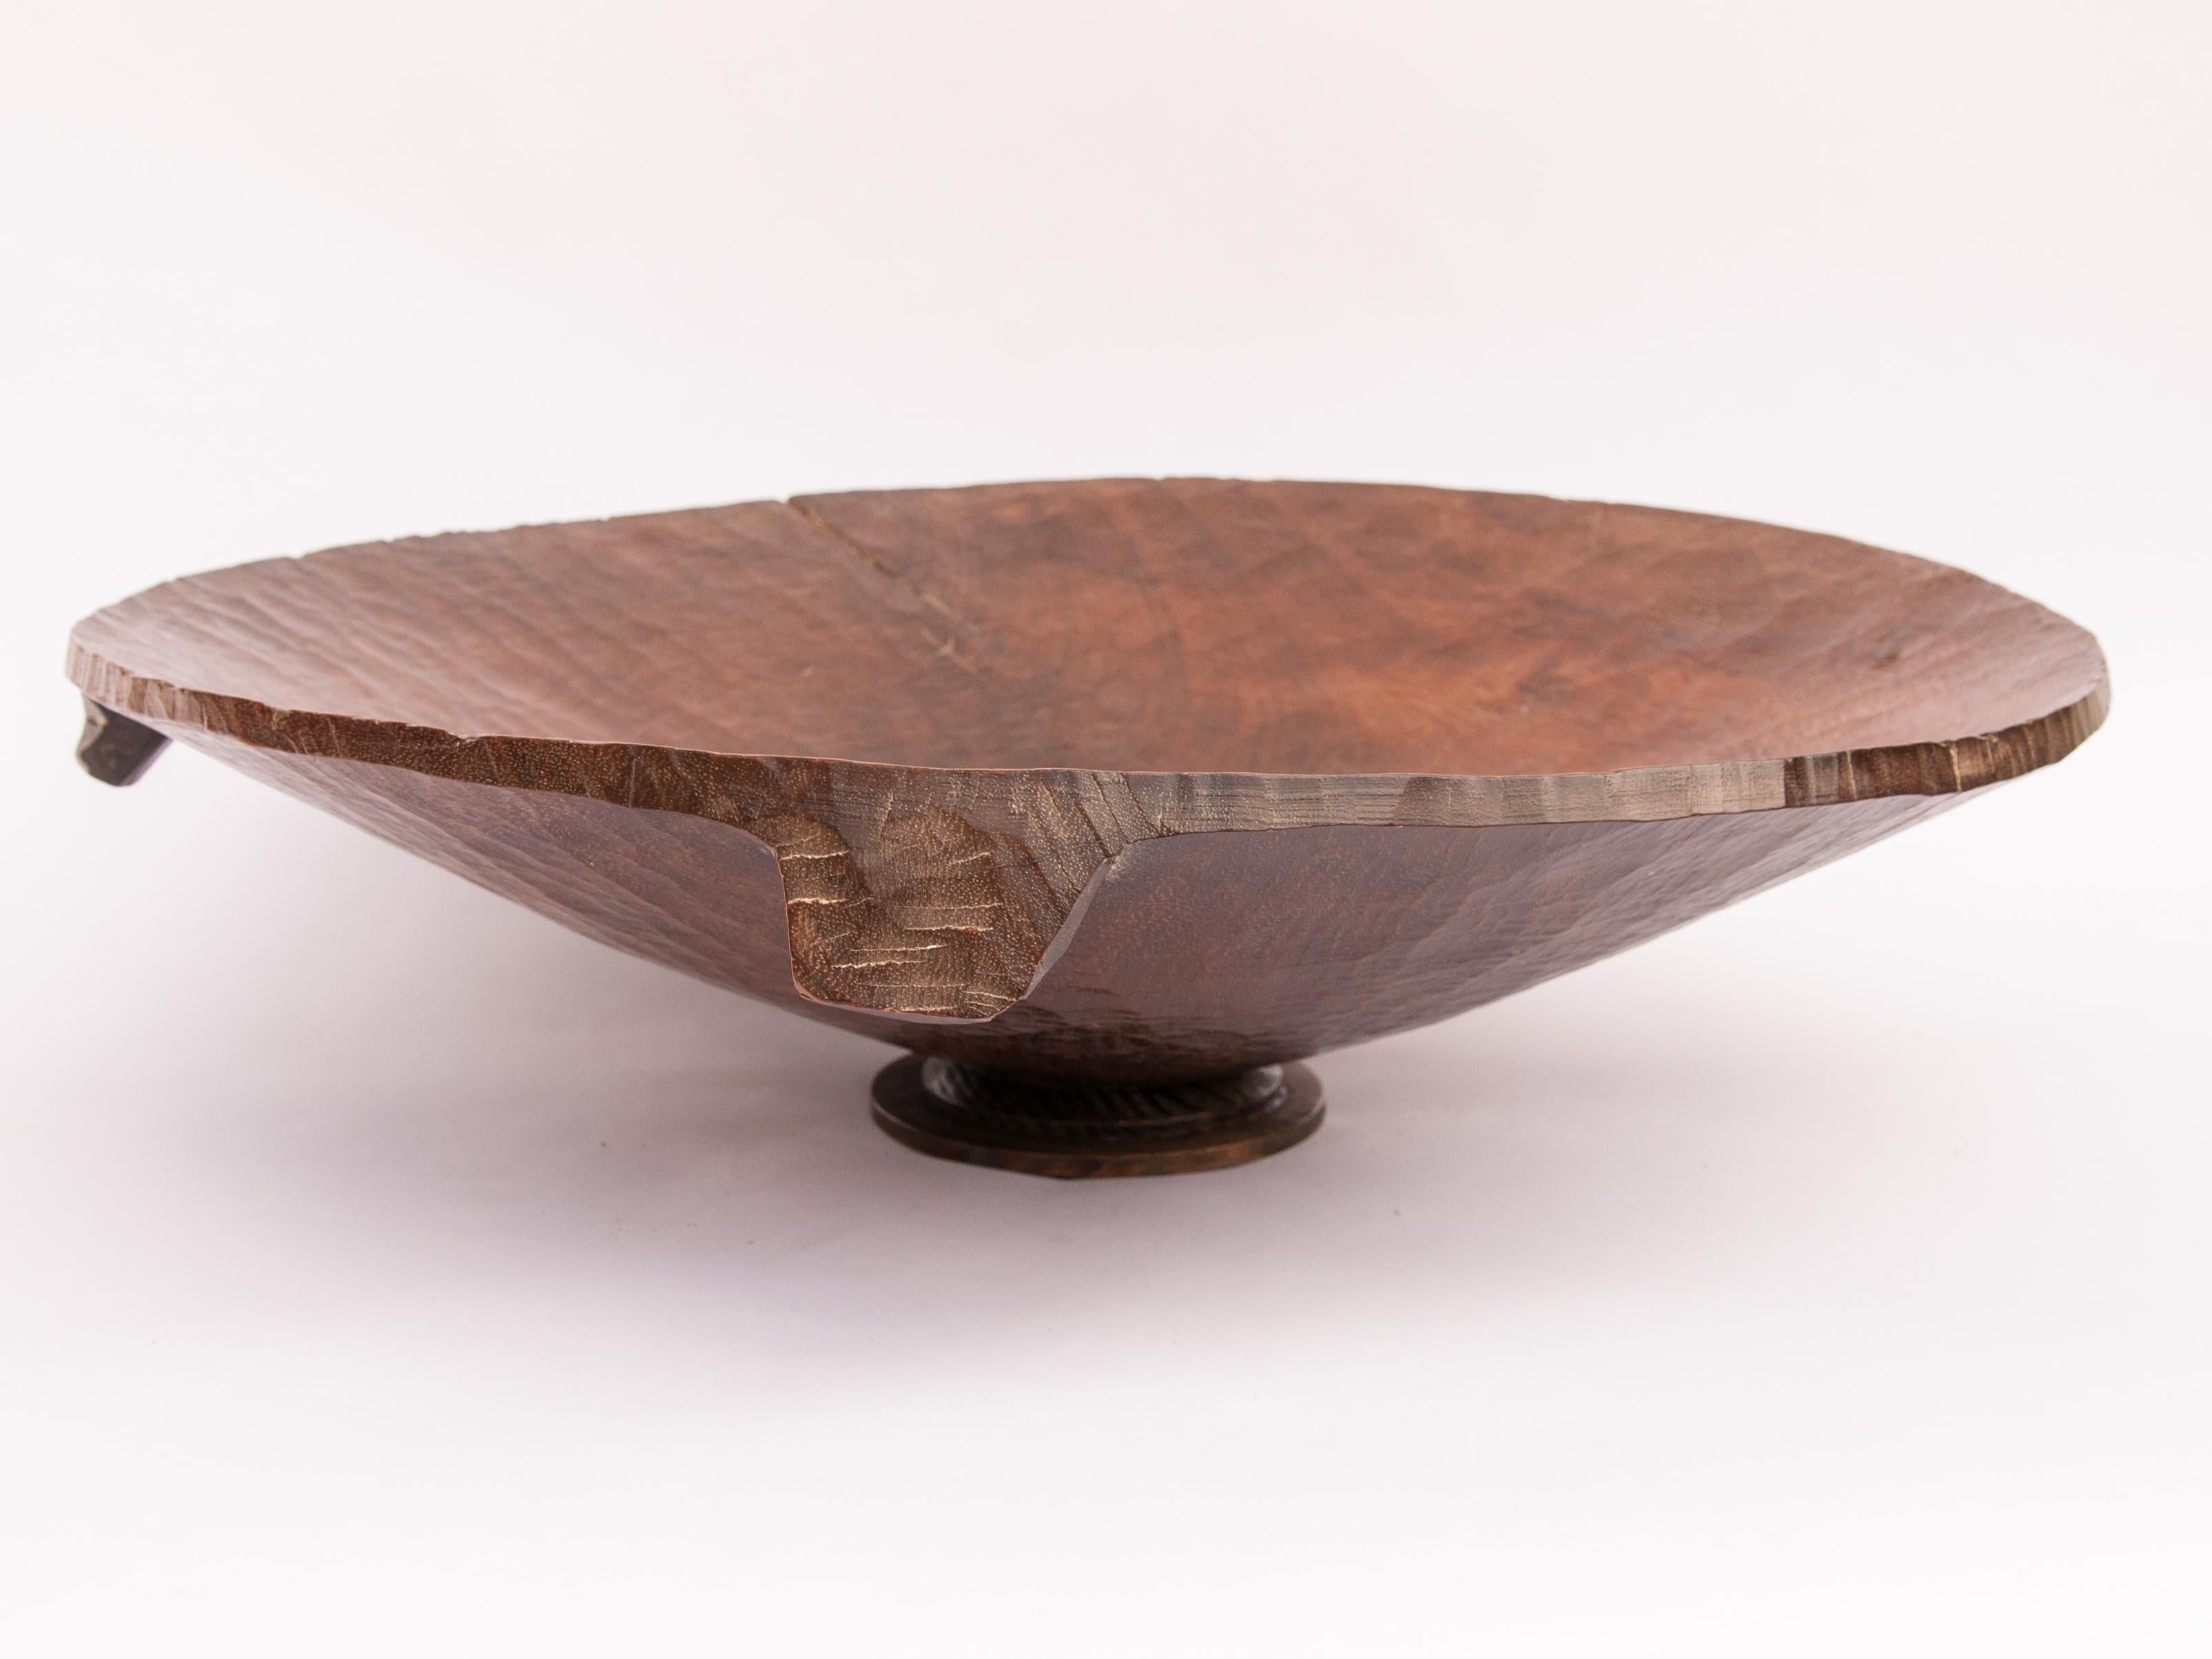 Rustic Vintage Gold Panning Tray / Bowl, Footed, NE Thailand, Mid-20th Century